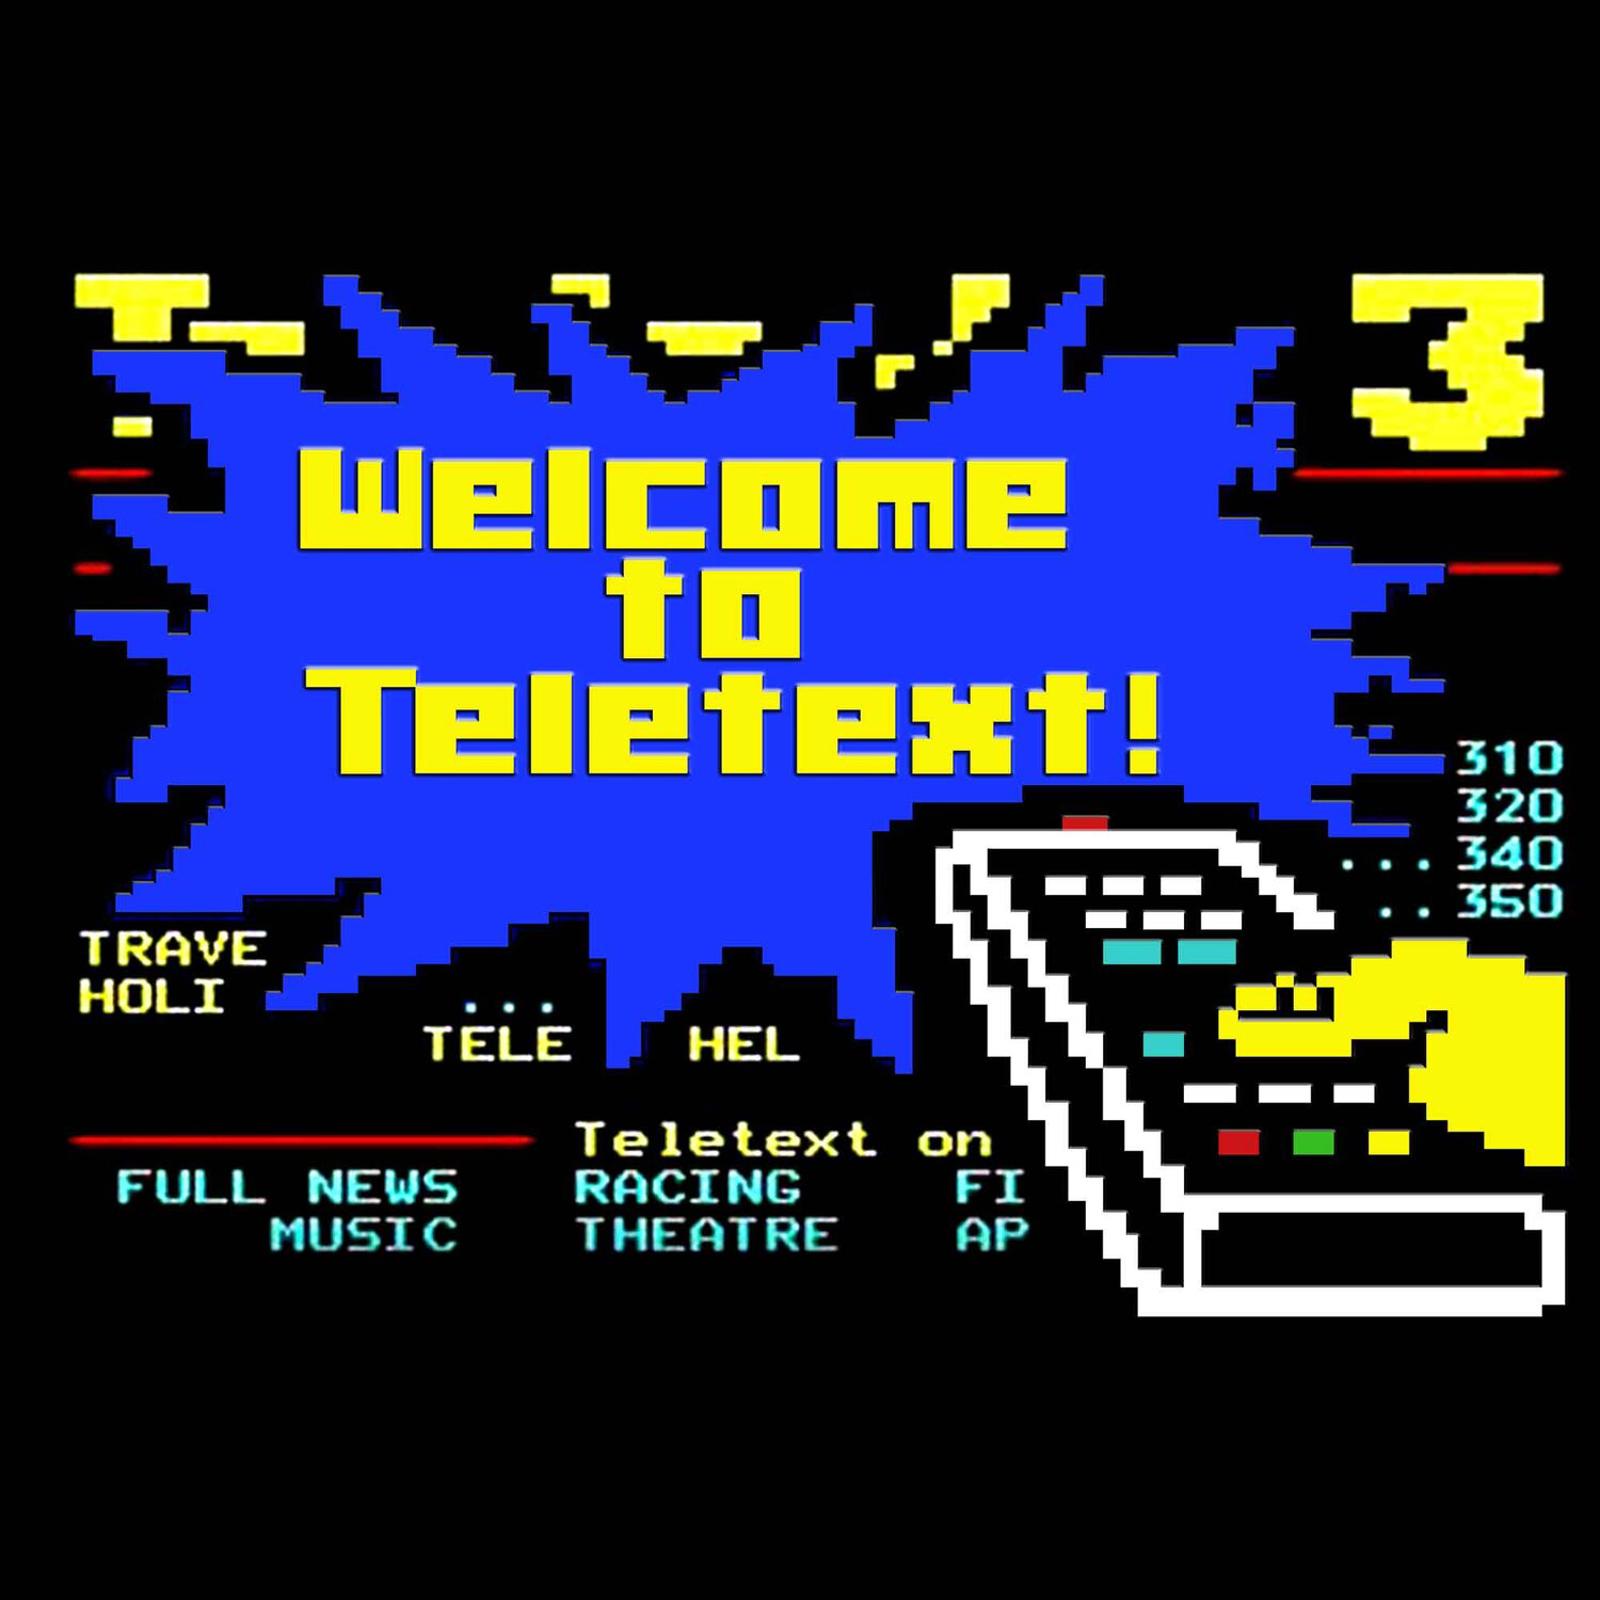 The Vidiot Teletext Style image by thevidiot